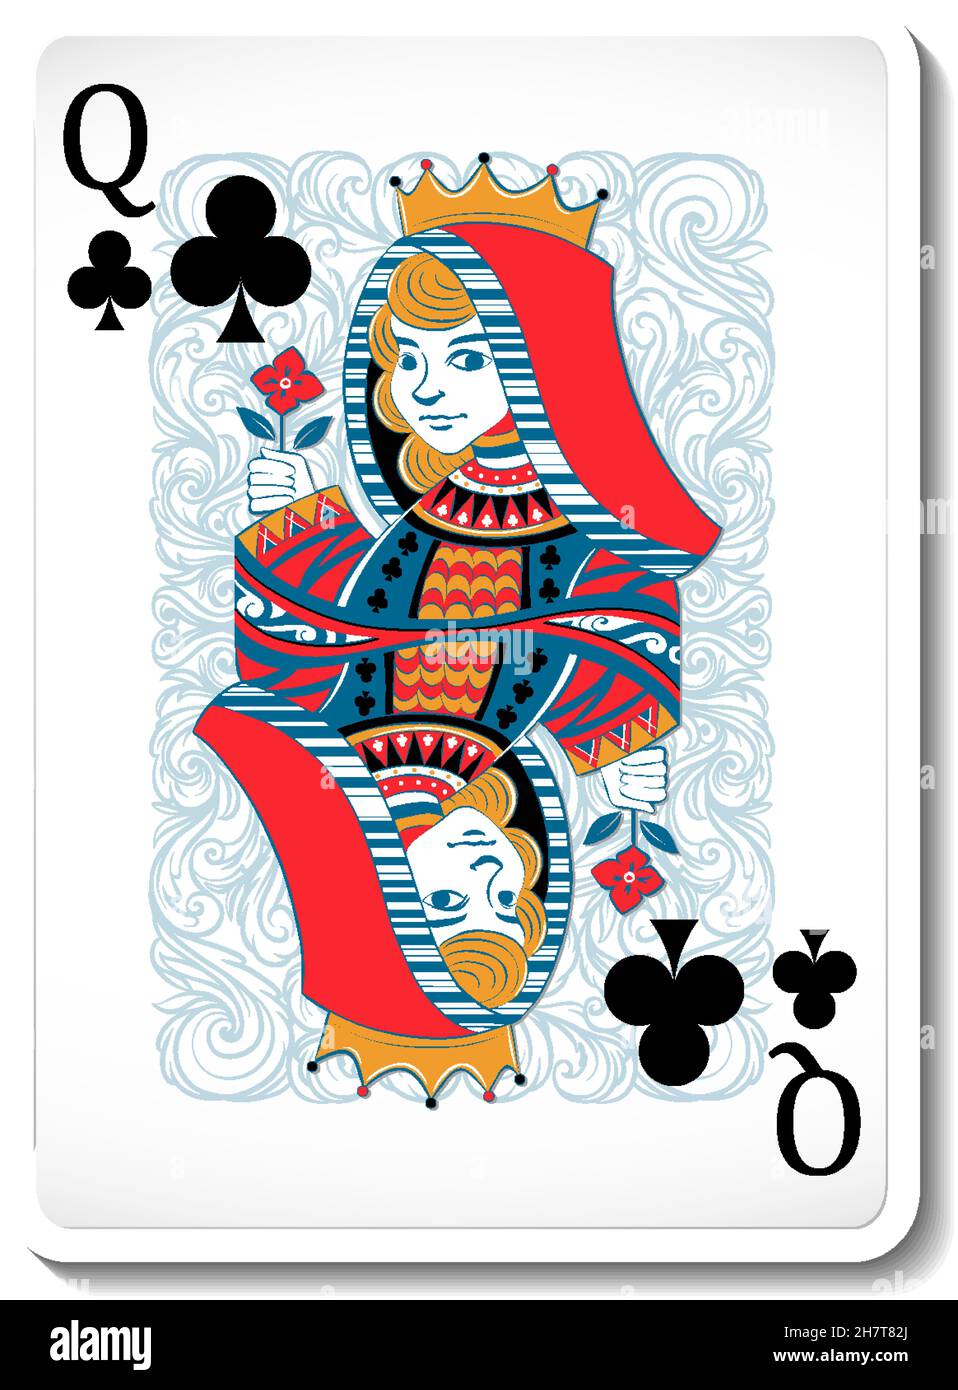 Queen of clubs Stock Vector Images - Alamy